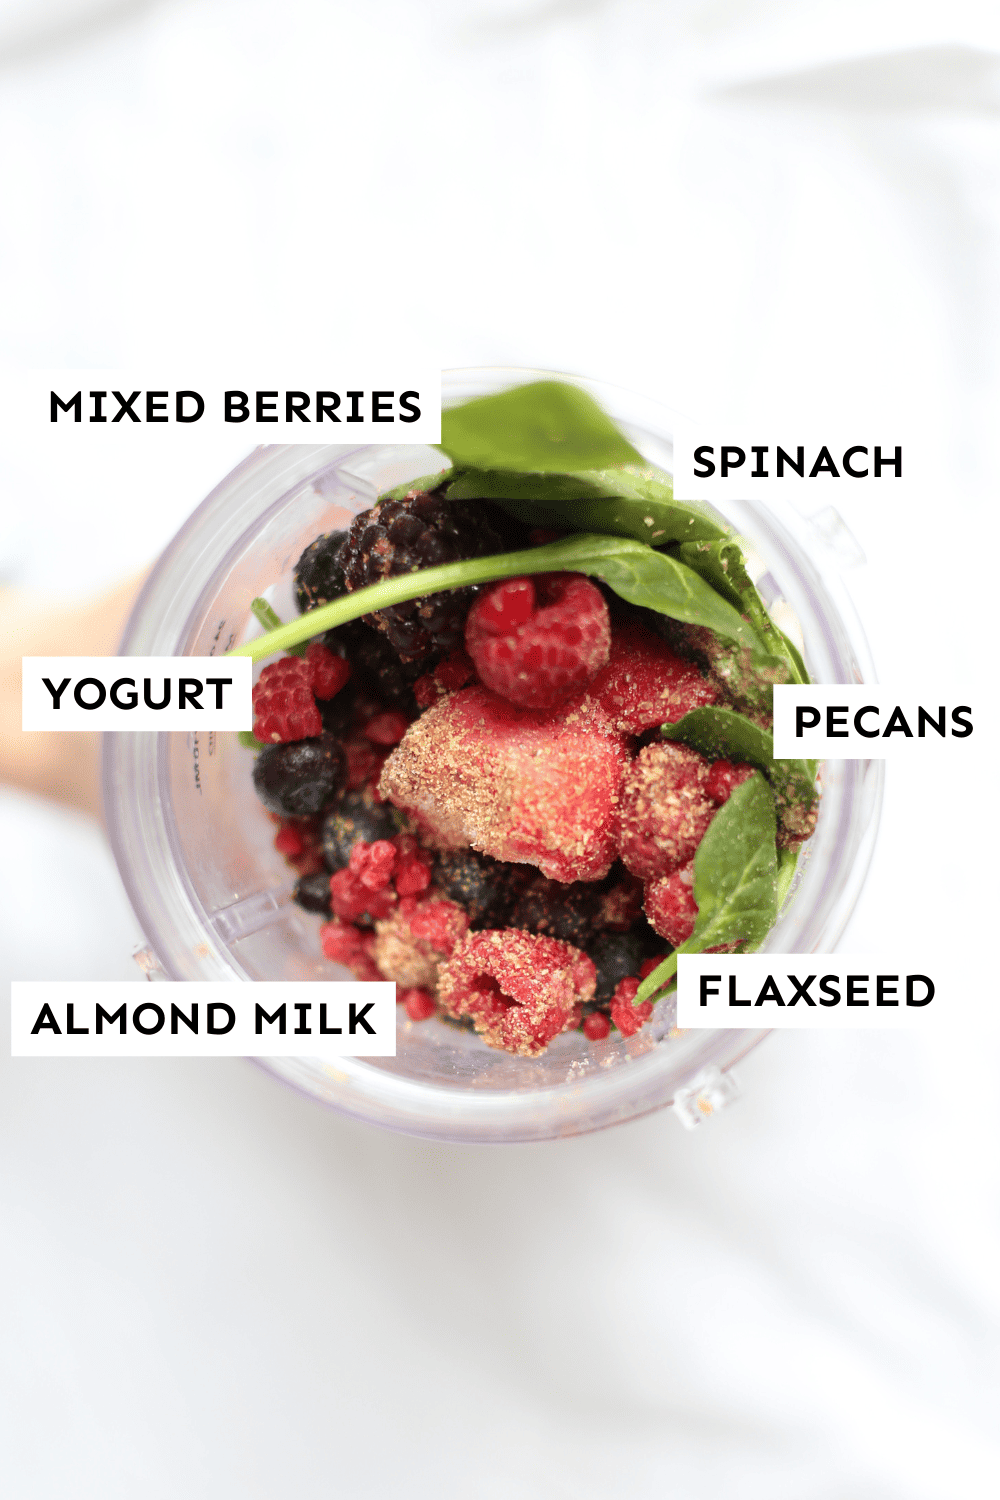 Labeled ingredients for a berry smoothie. 